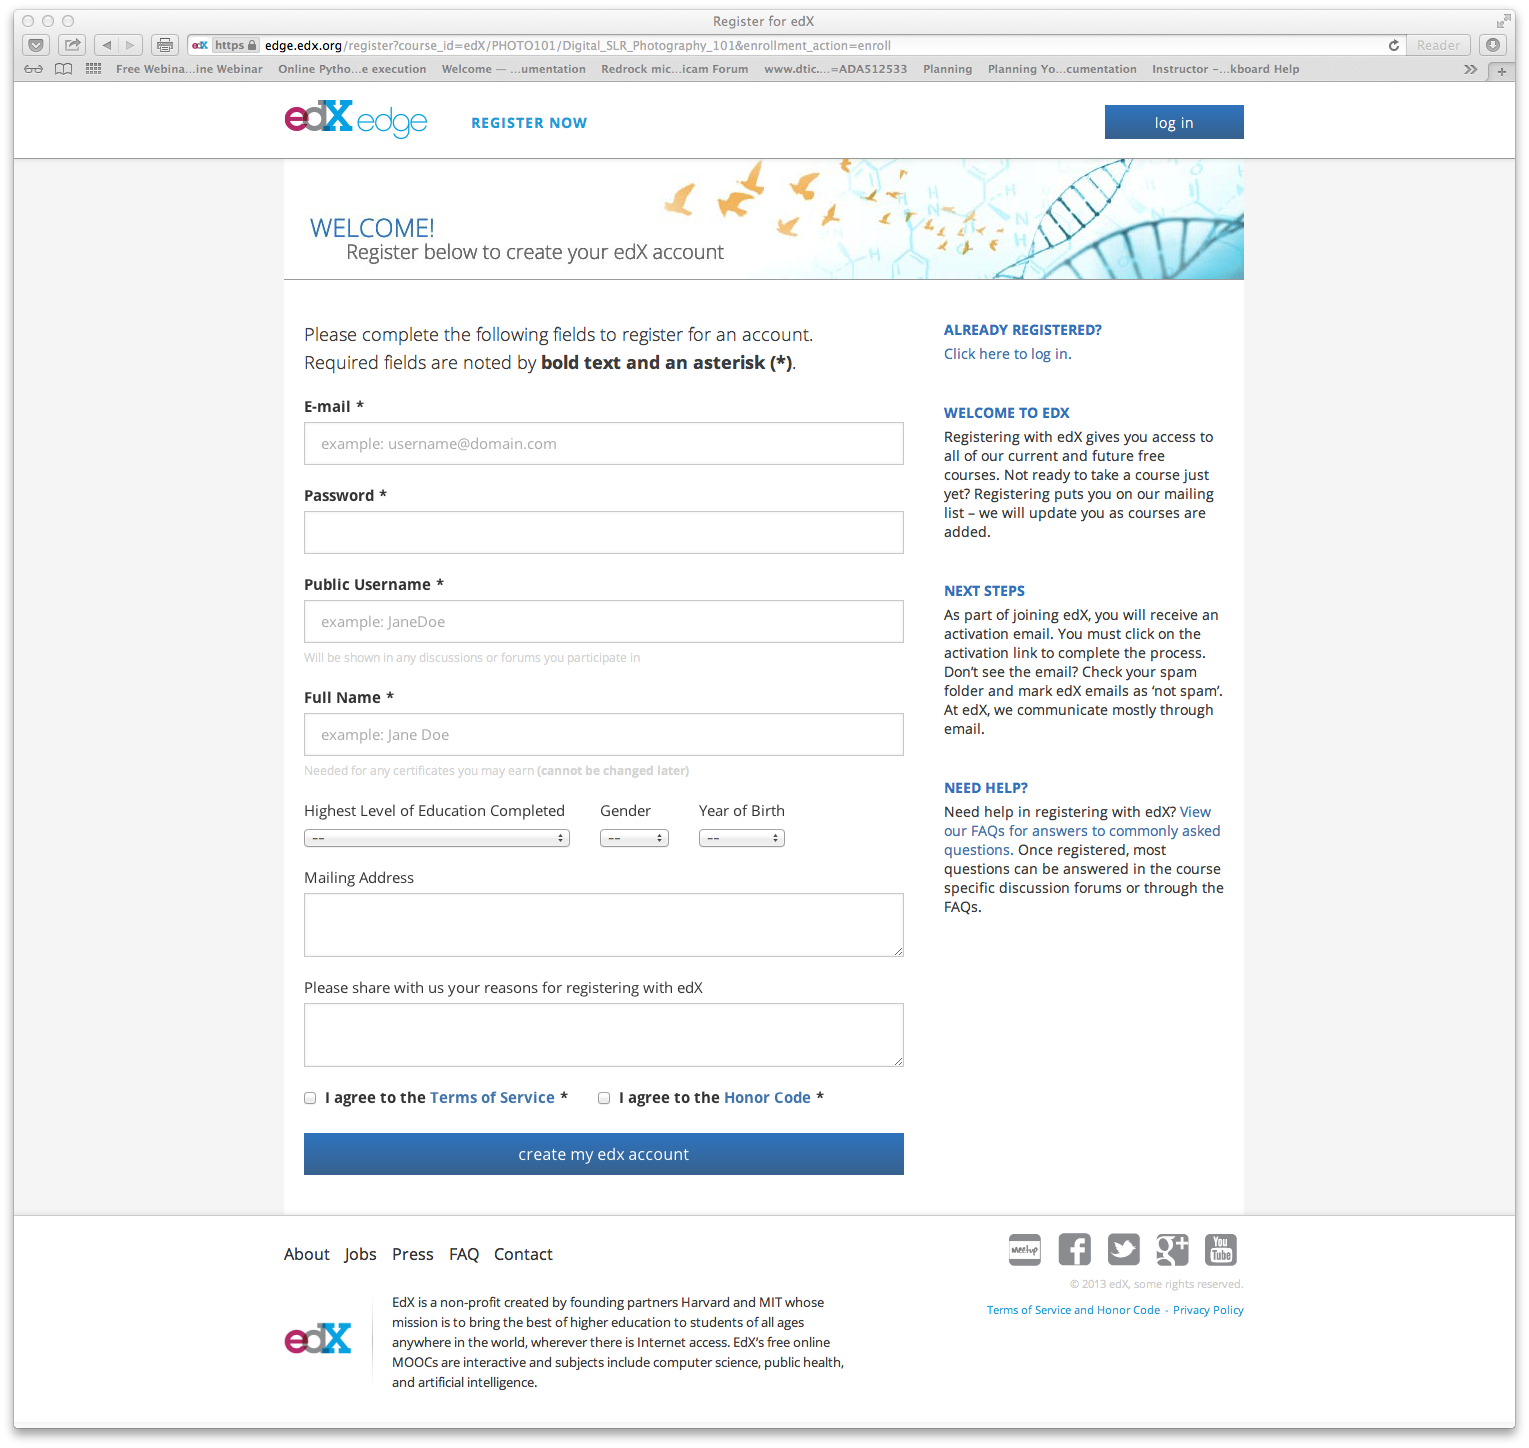 Image of the registration page